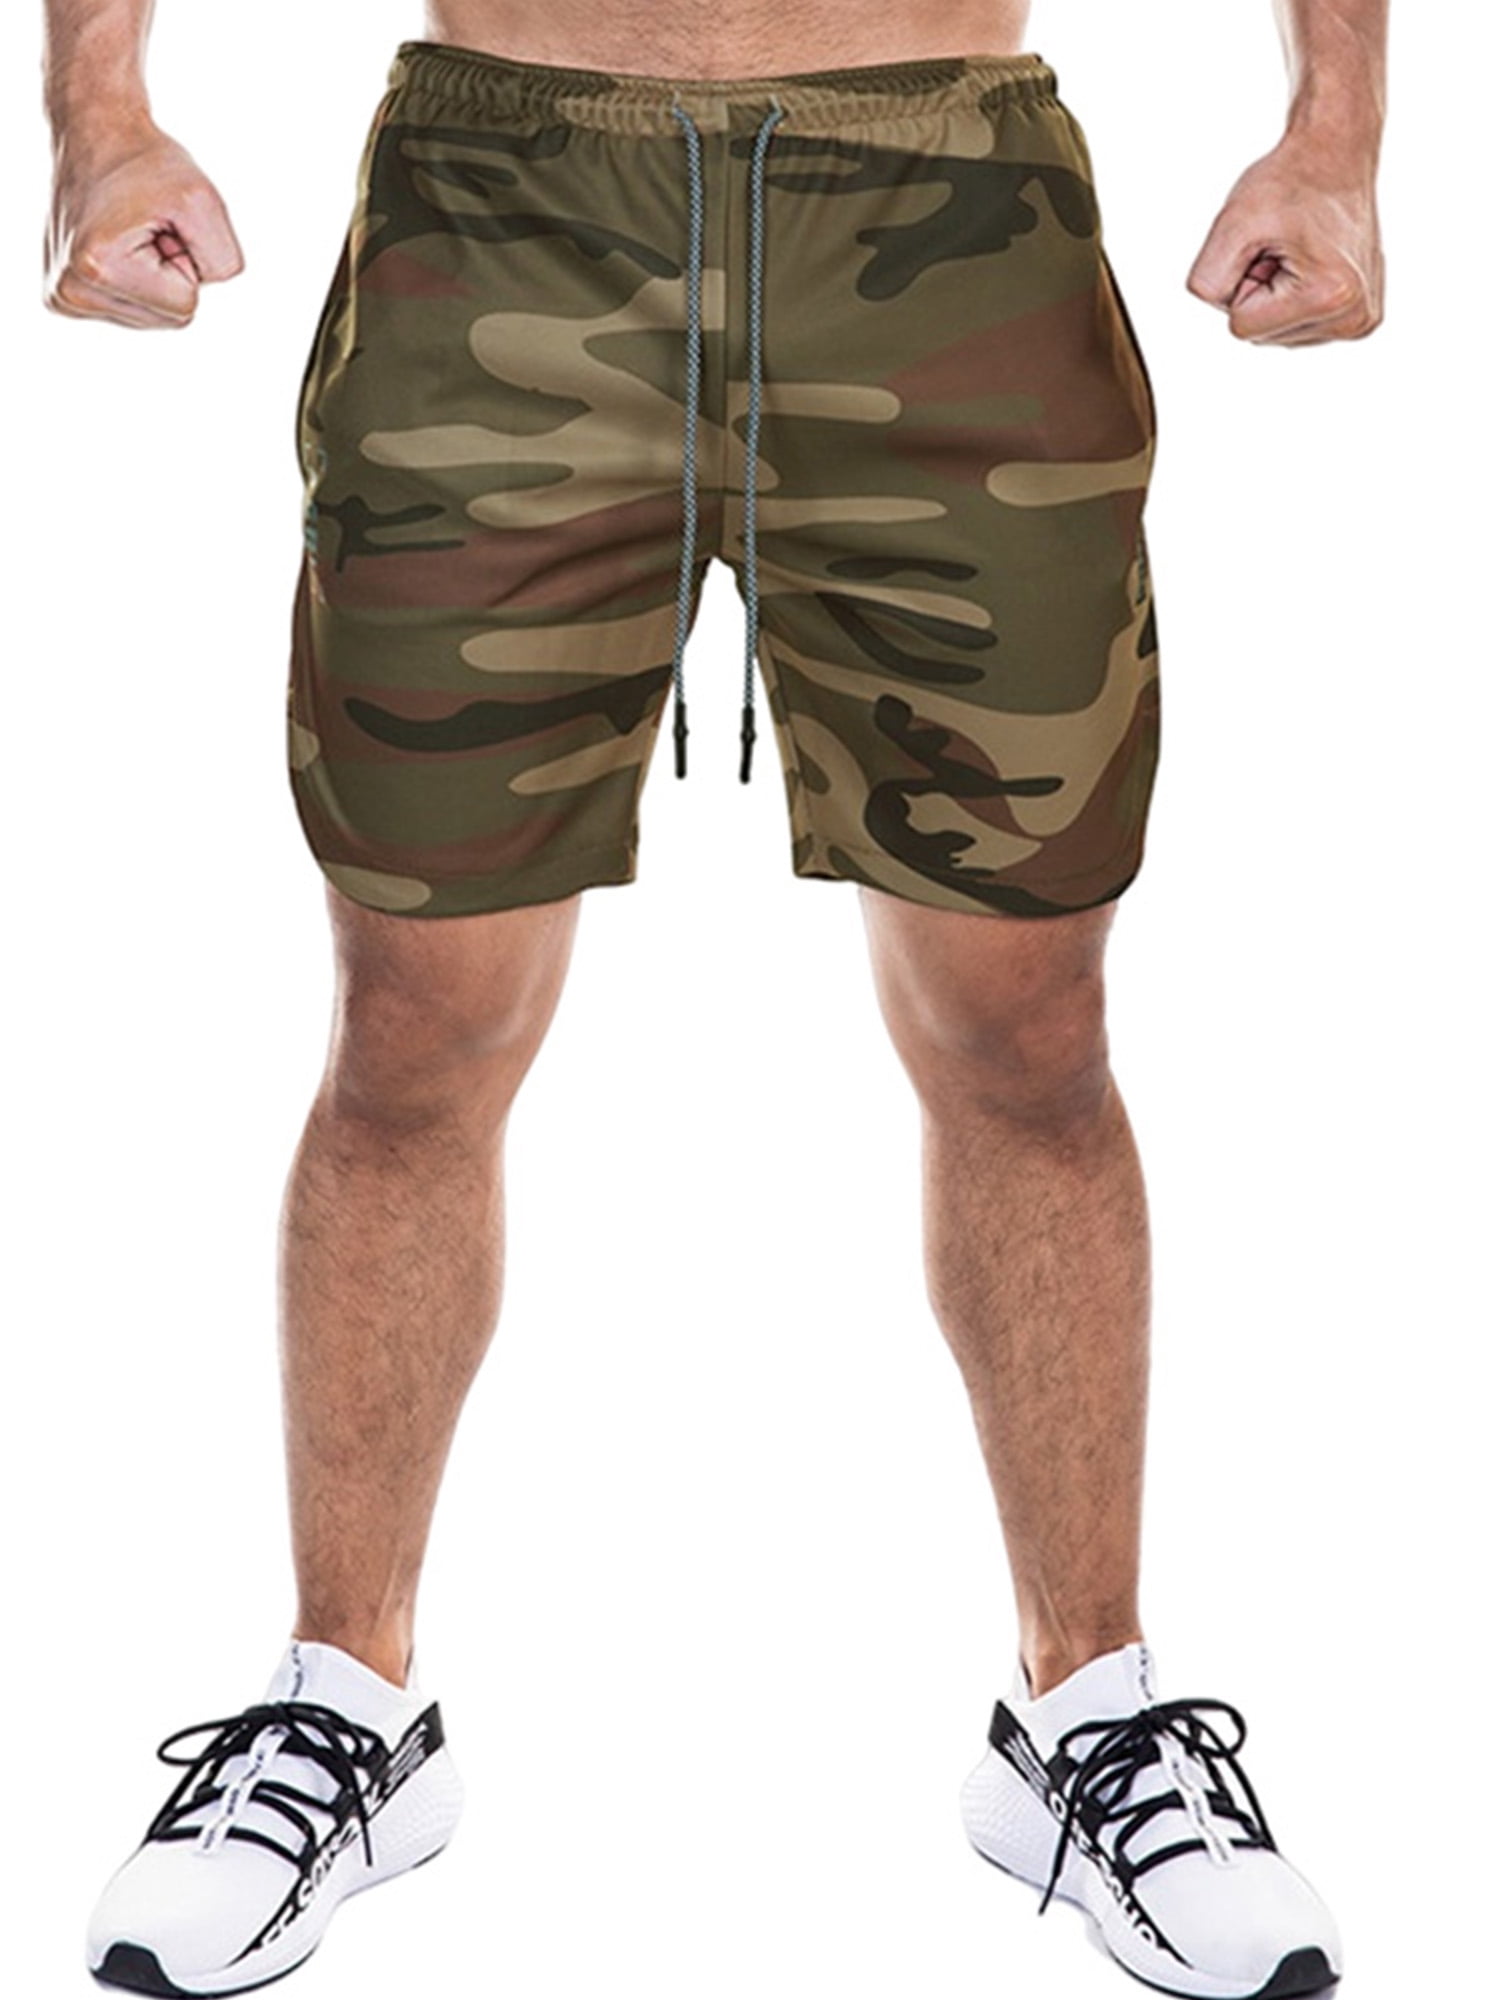 Not applicable Mens Fashion Grey Camouflage Goat Design Elastic Beach Shorts Sports Shorts 